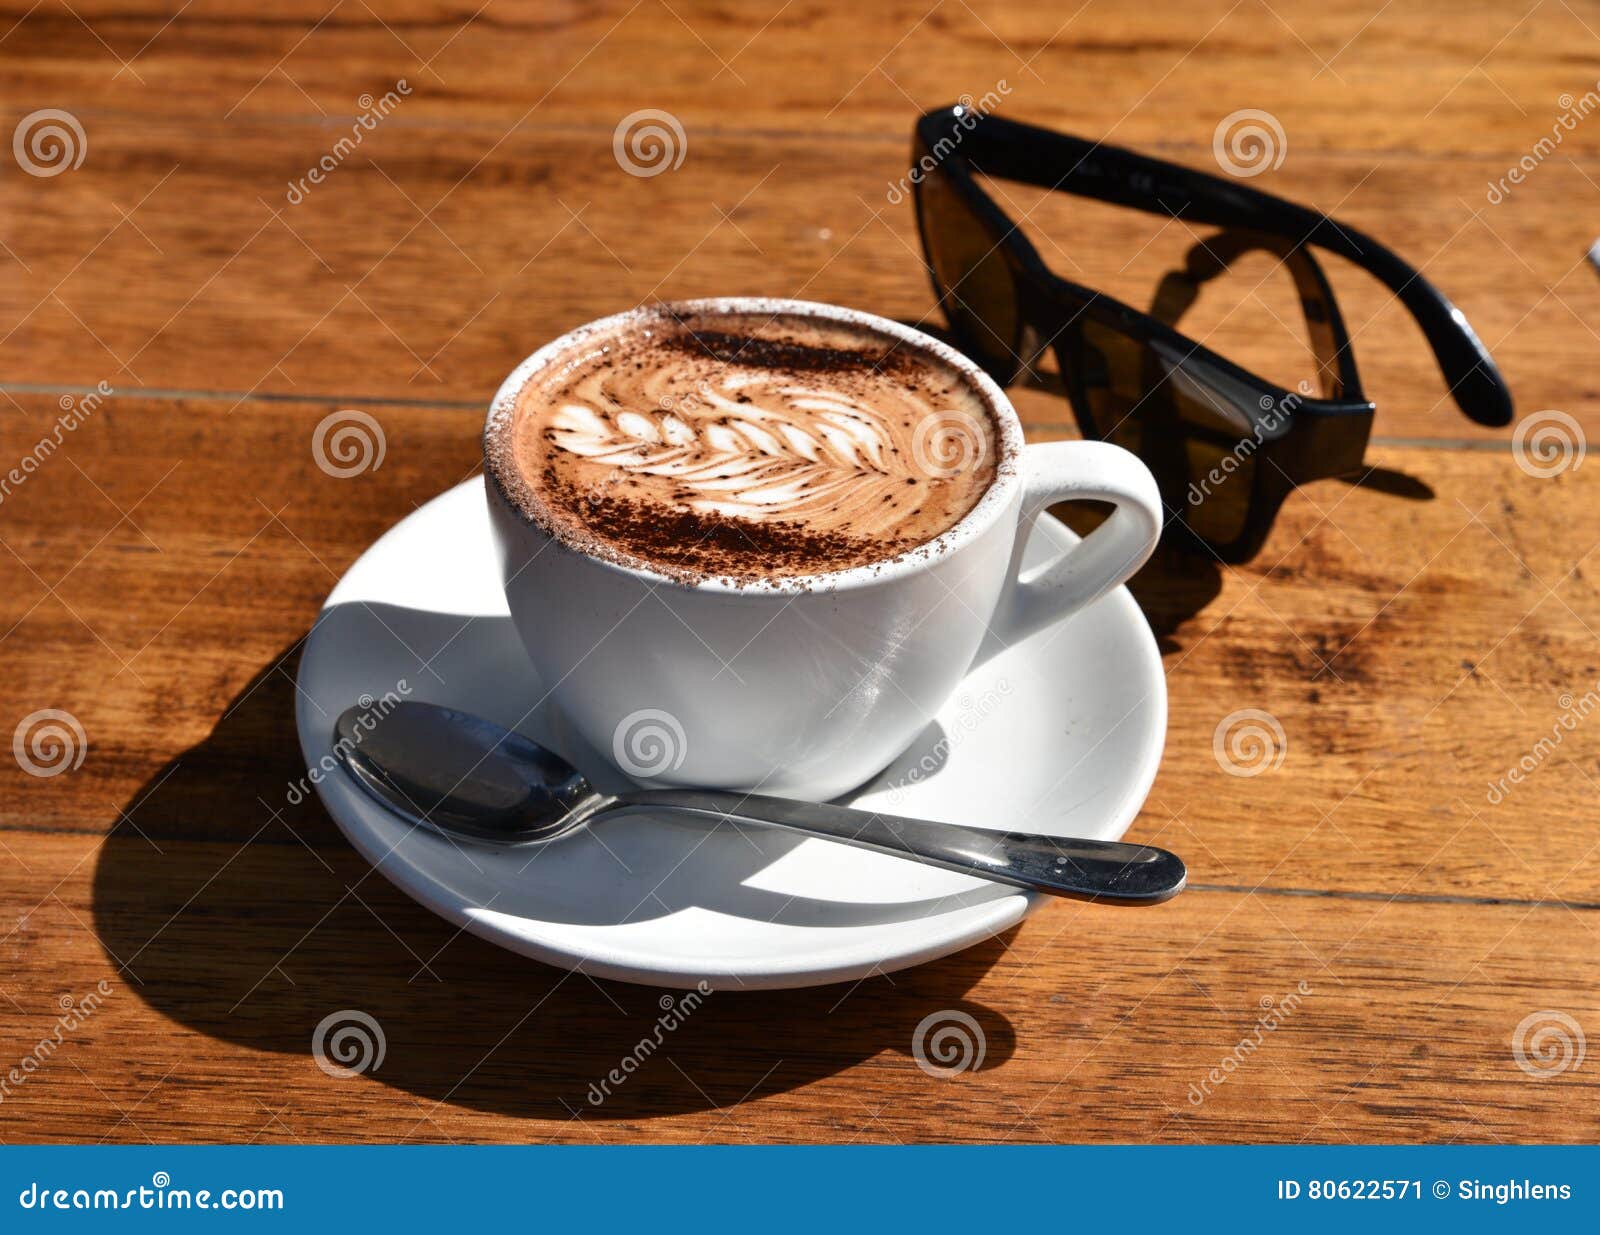 Good Morning, Fresh Coffee on Wooden Top Stock Image - Image of ...